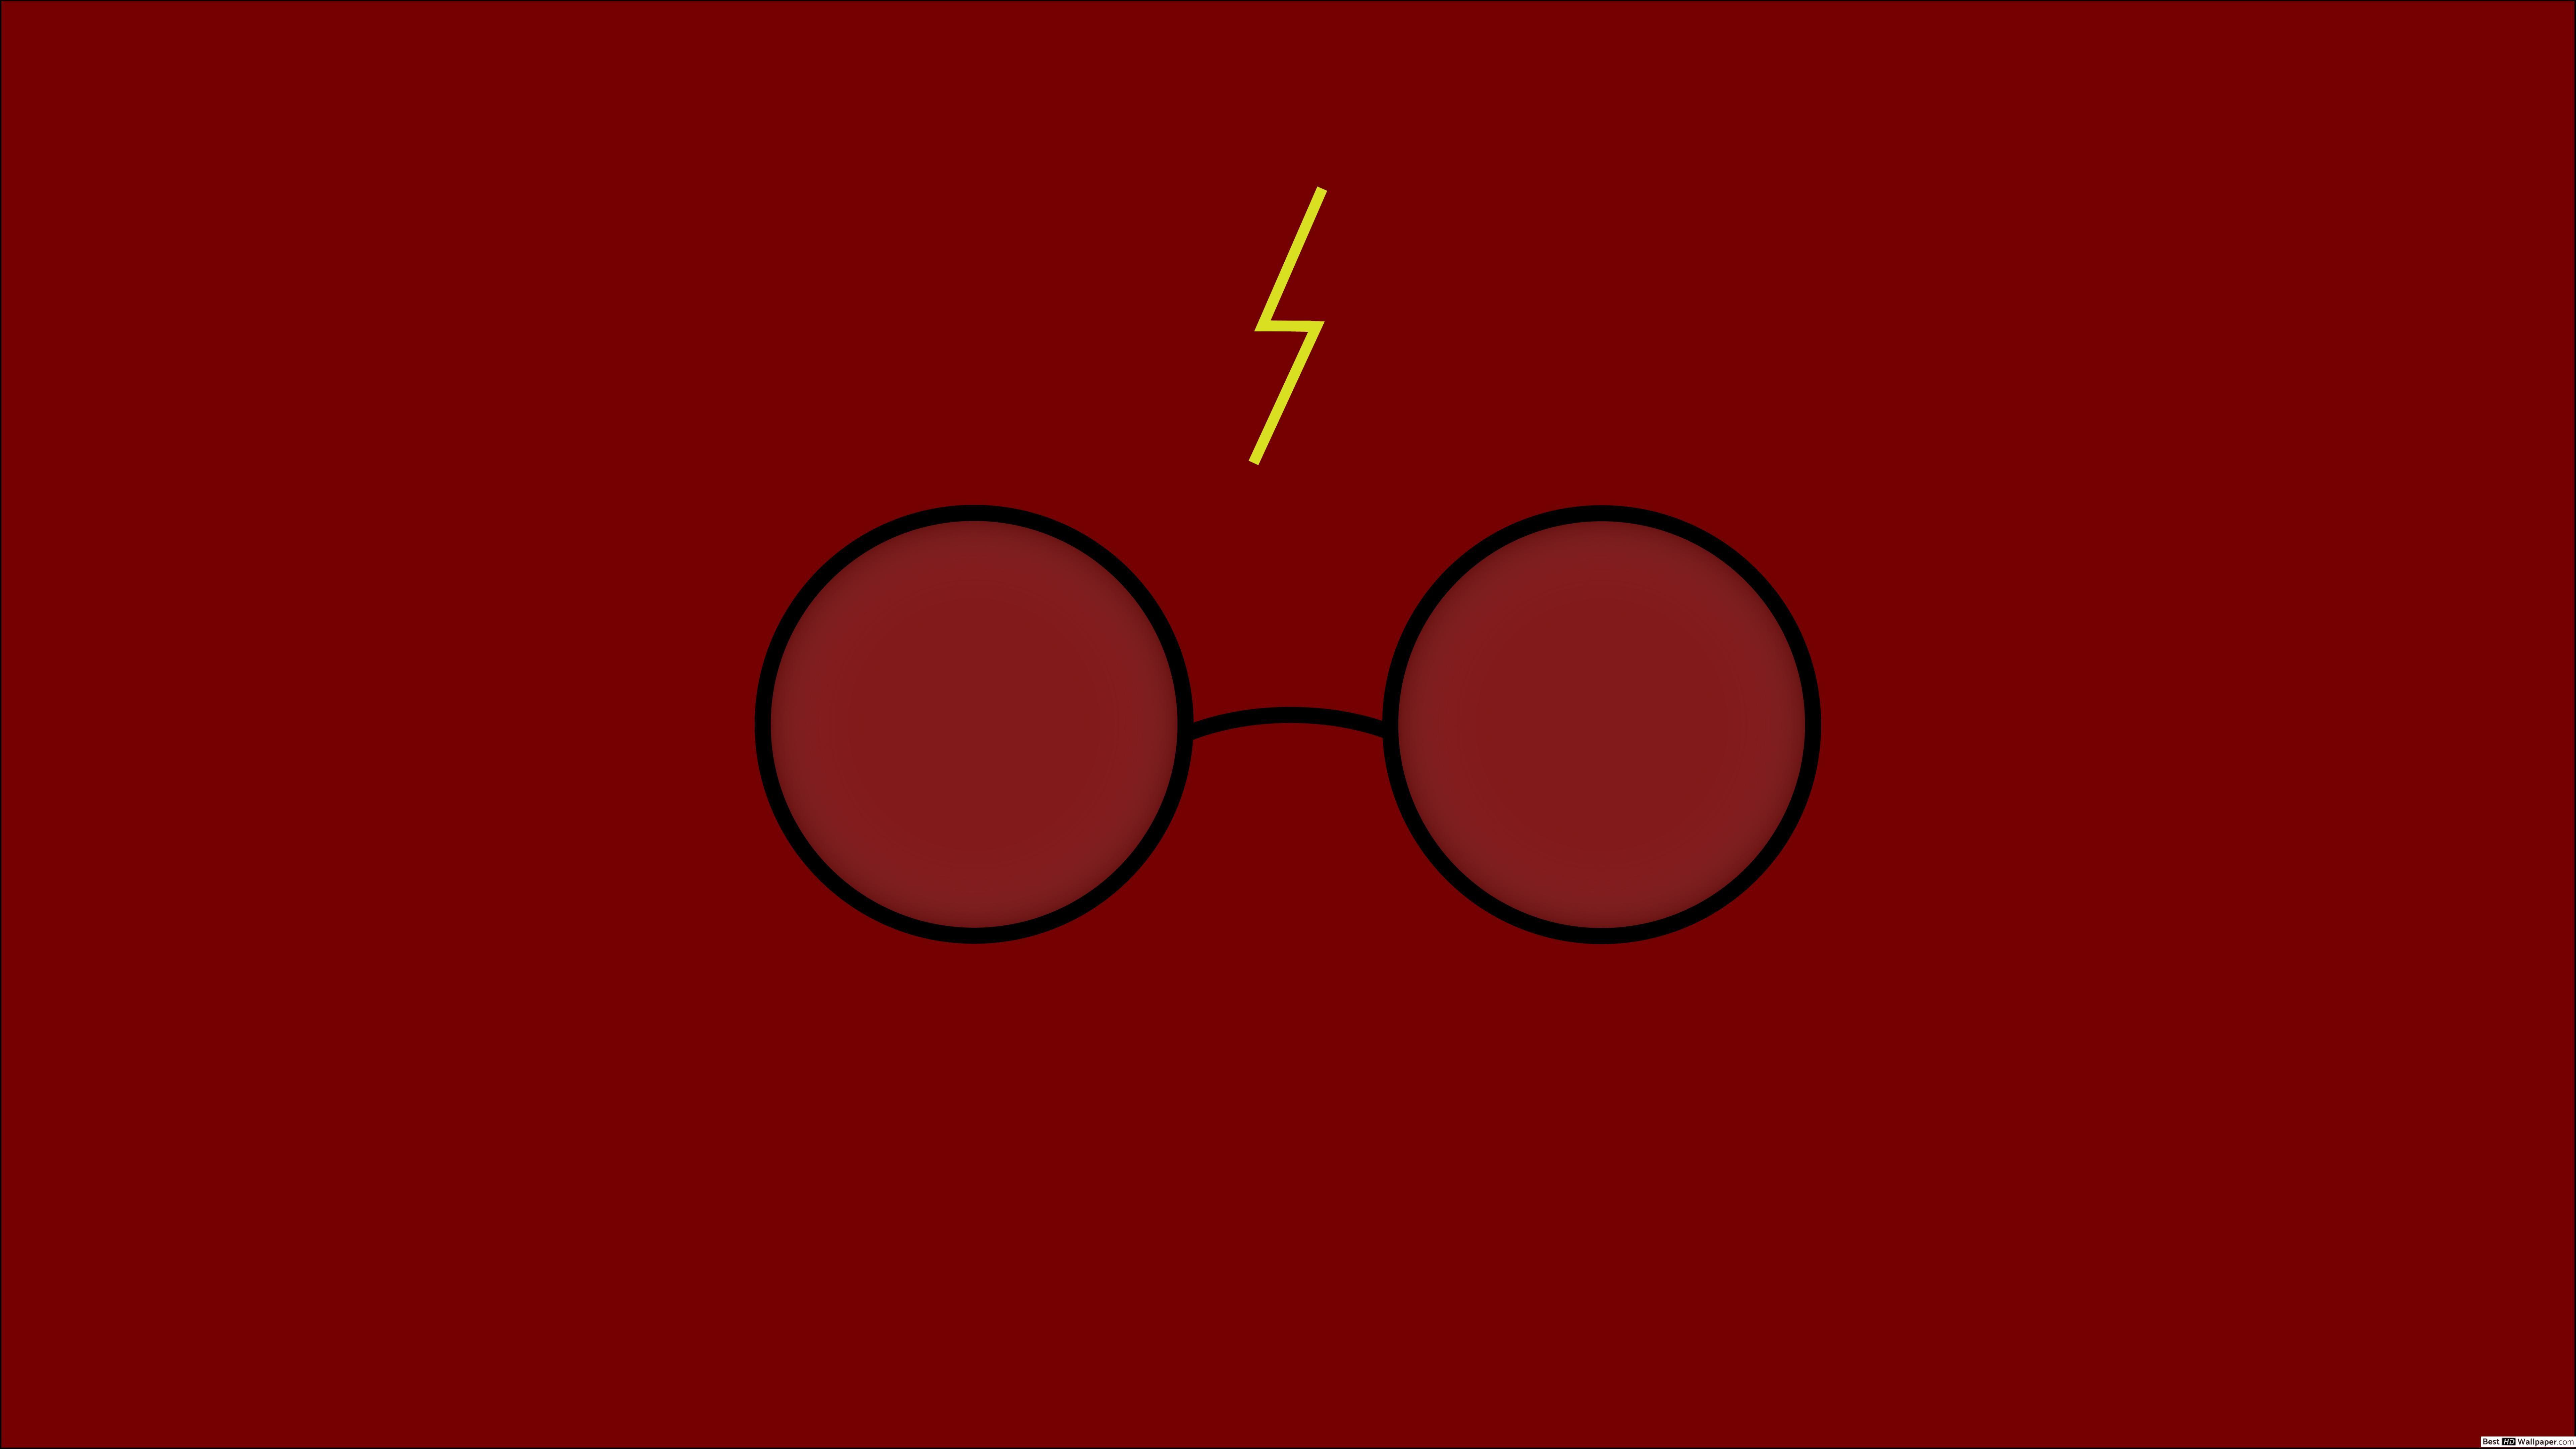 Harry Potter Glasses Wallpapers - Top Free Harry Potter Glasses ...